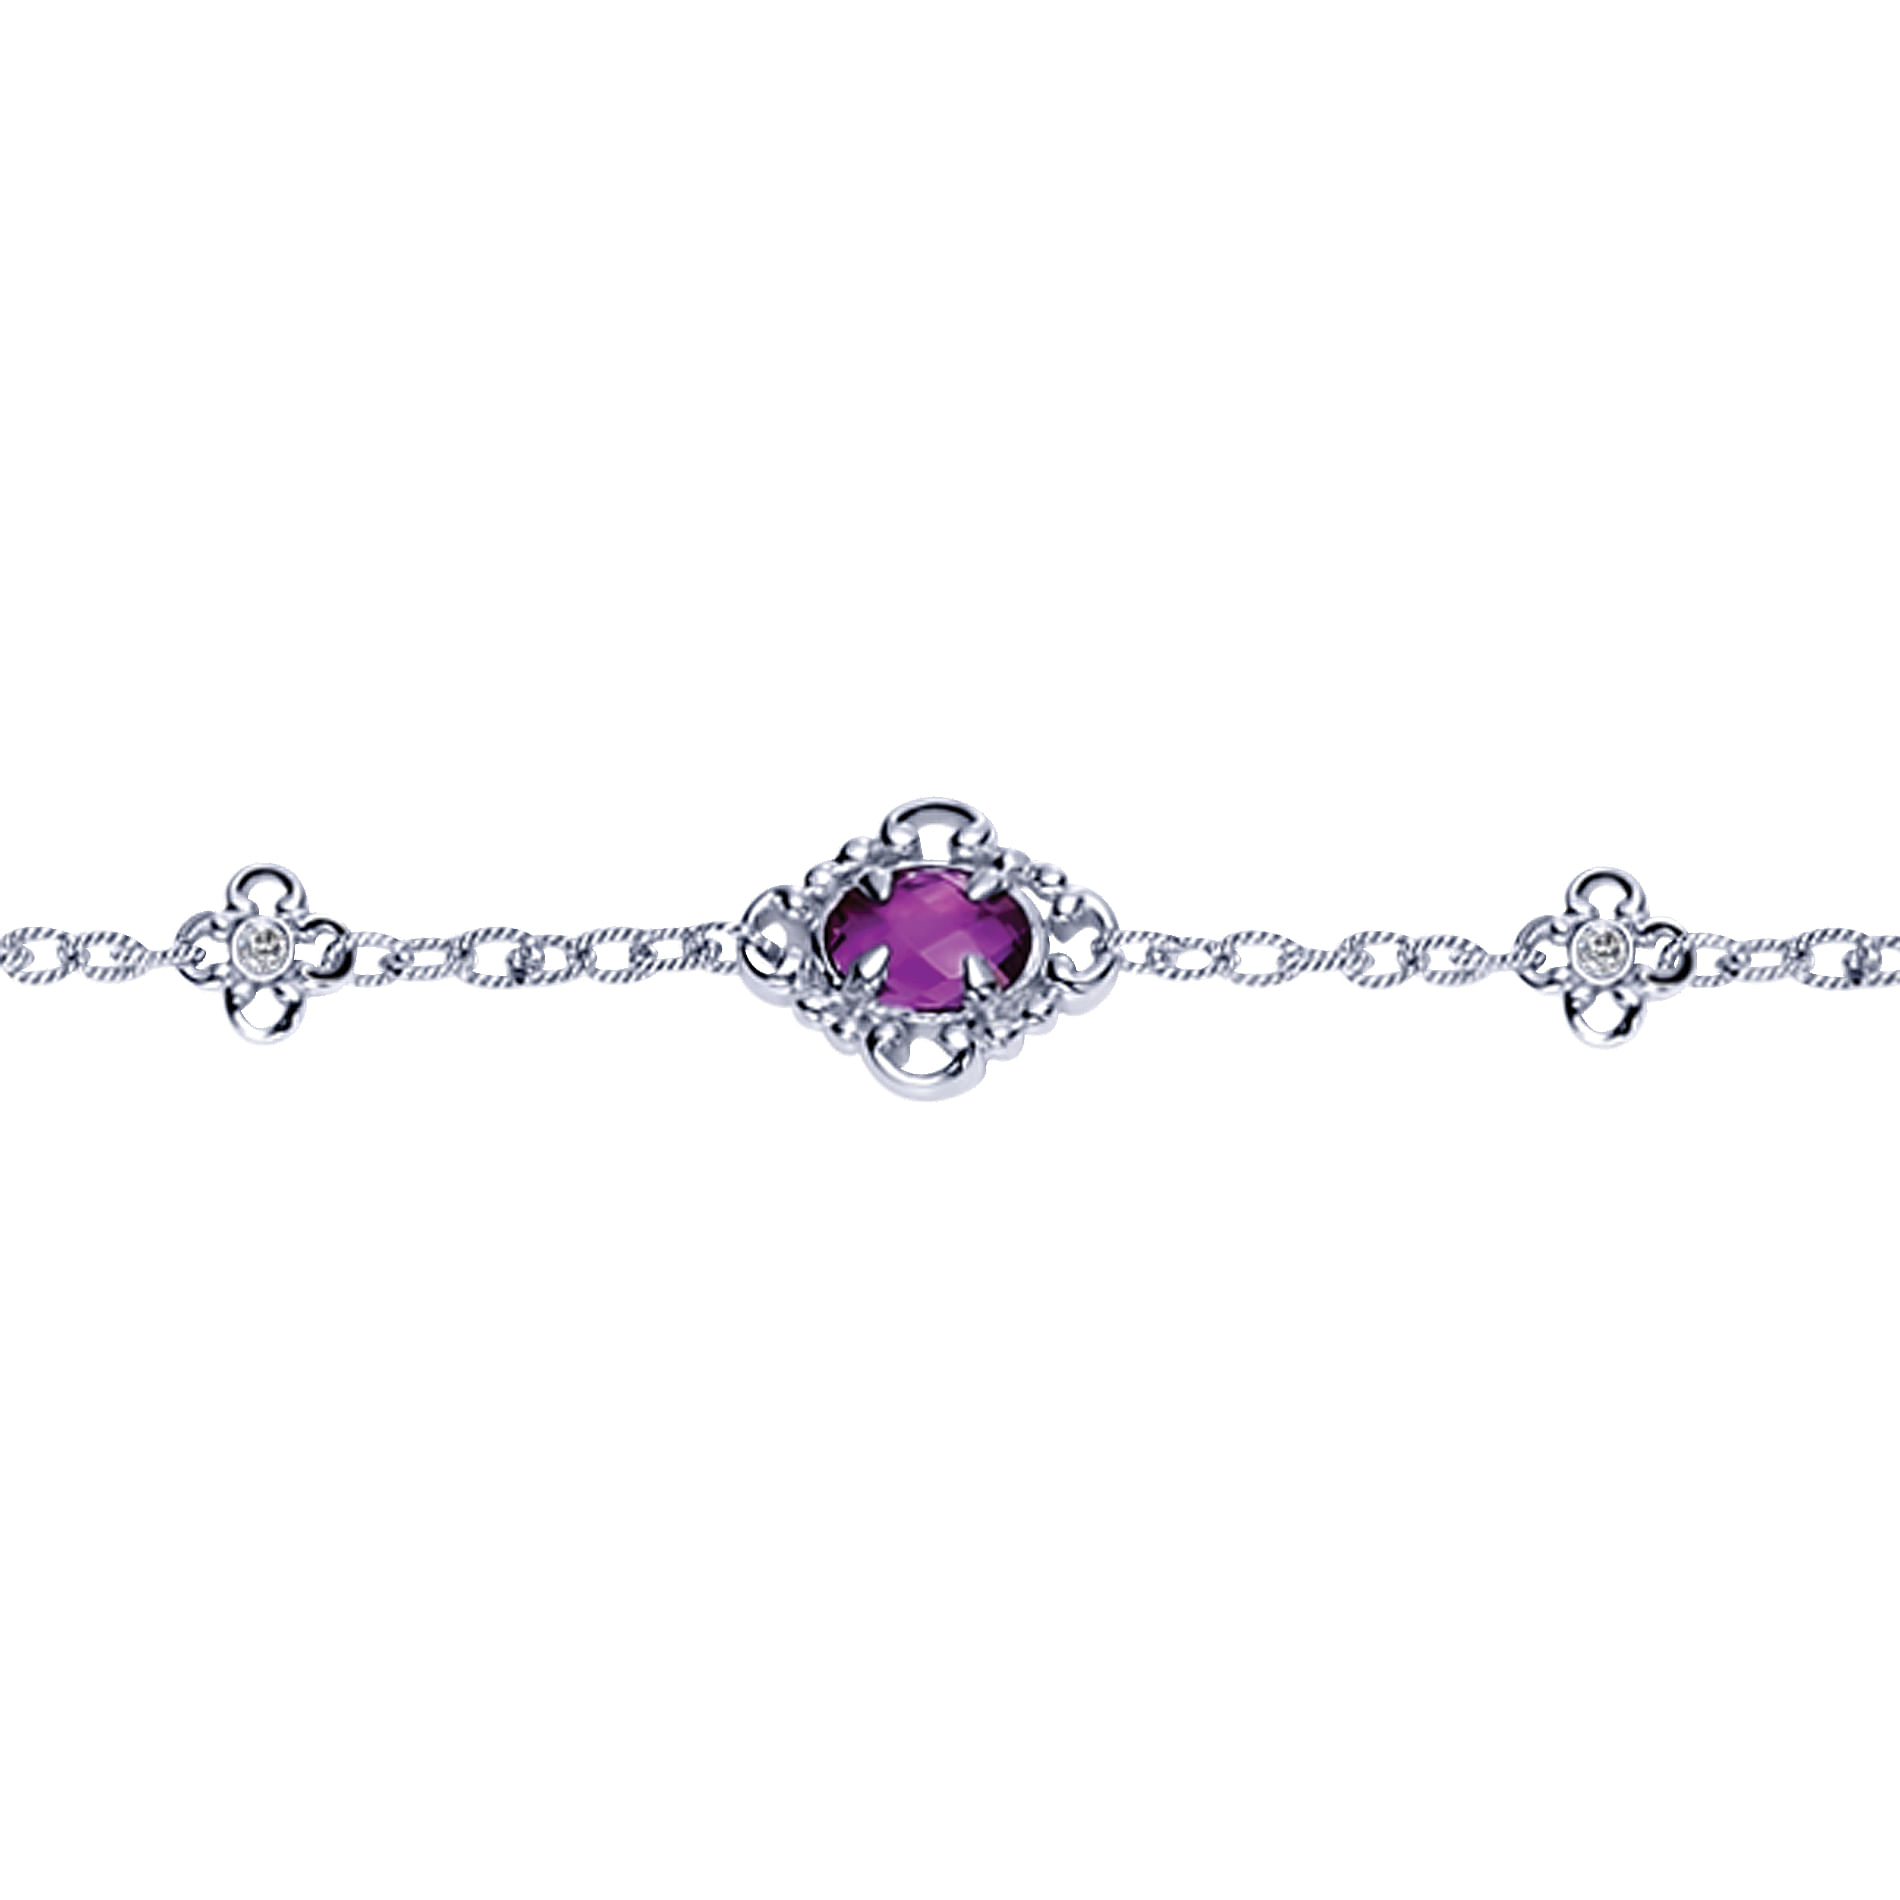 925 Sterling Silver Chain Bracelet with Filigree Amethyst Stations